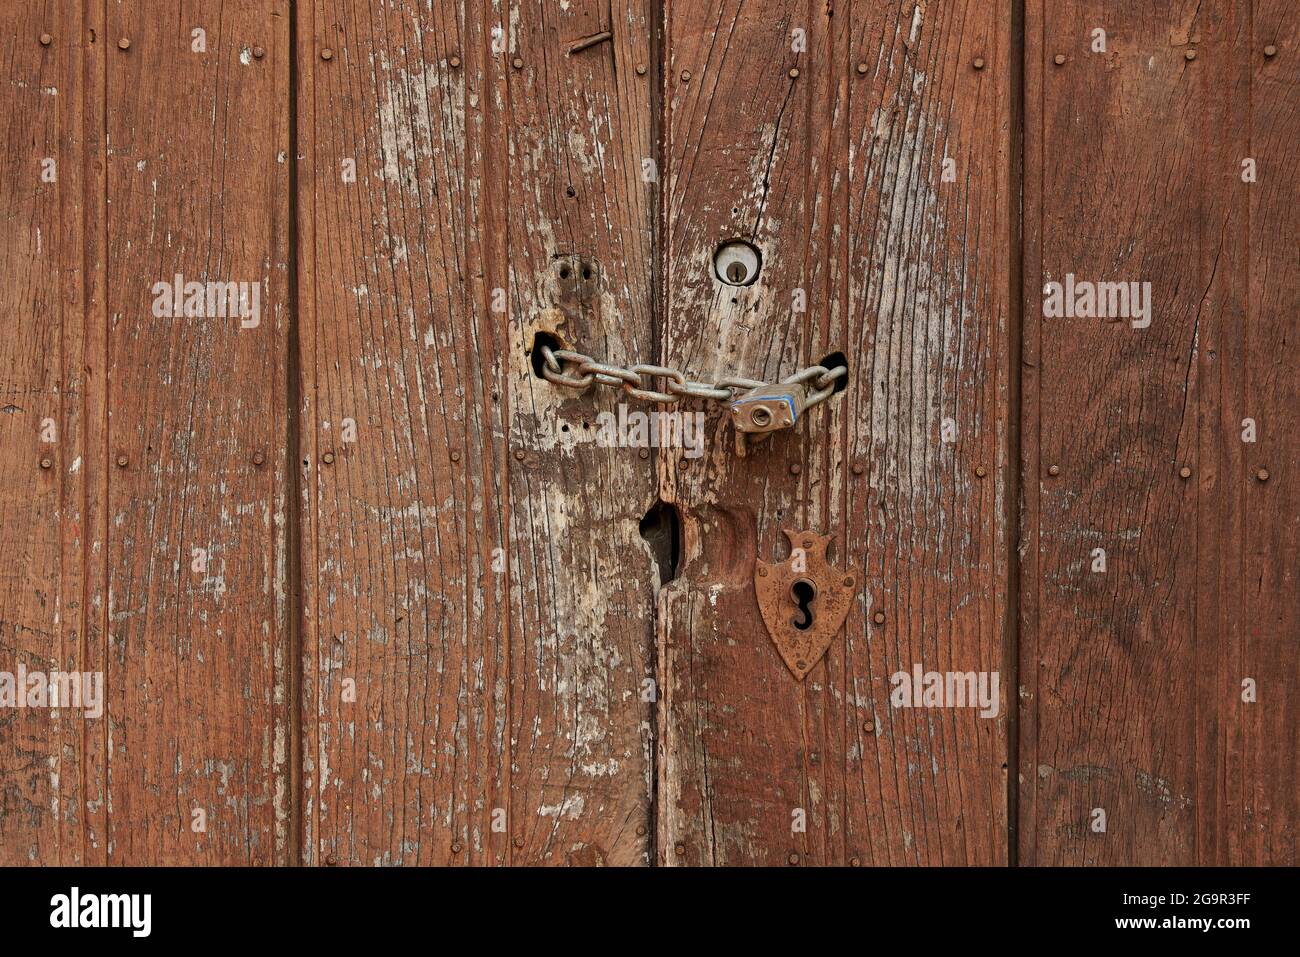 Antique wooden door with rusted hardware Stock Photo